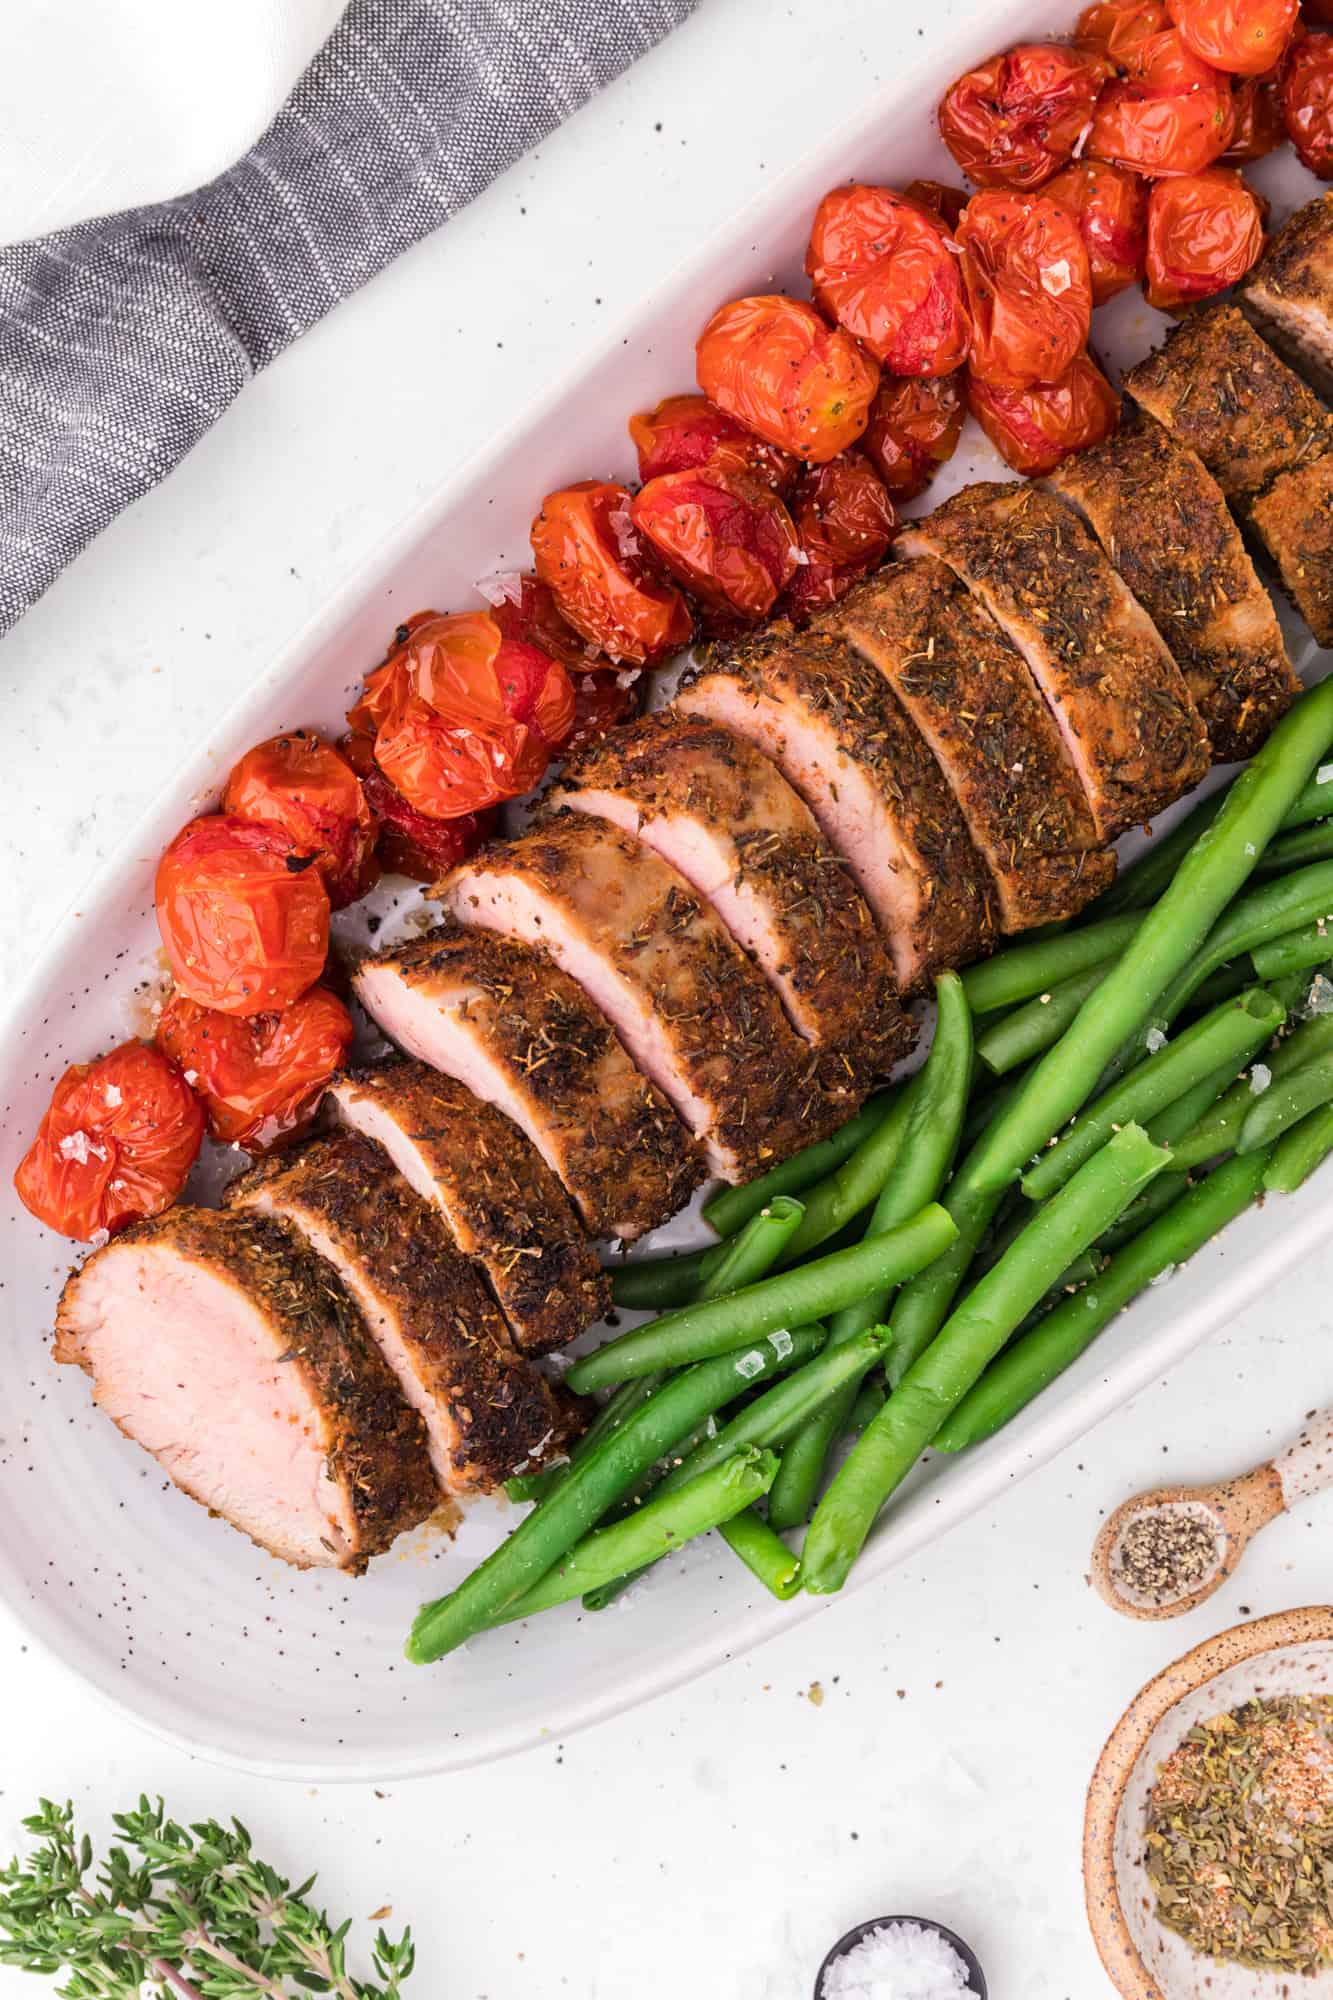 Pork on a platter with green beans and tomatoes.